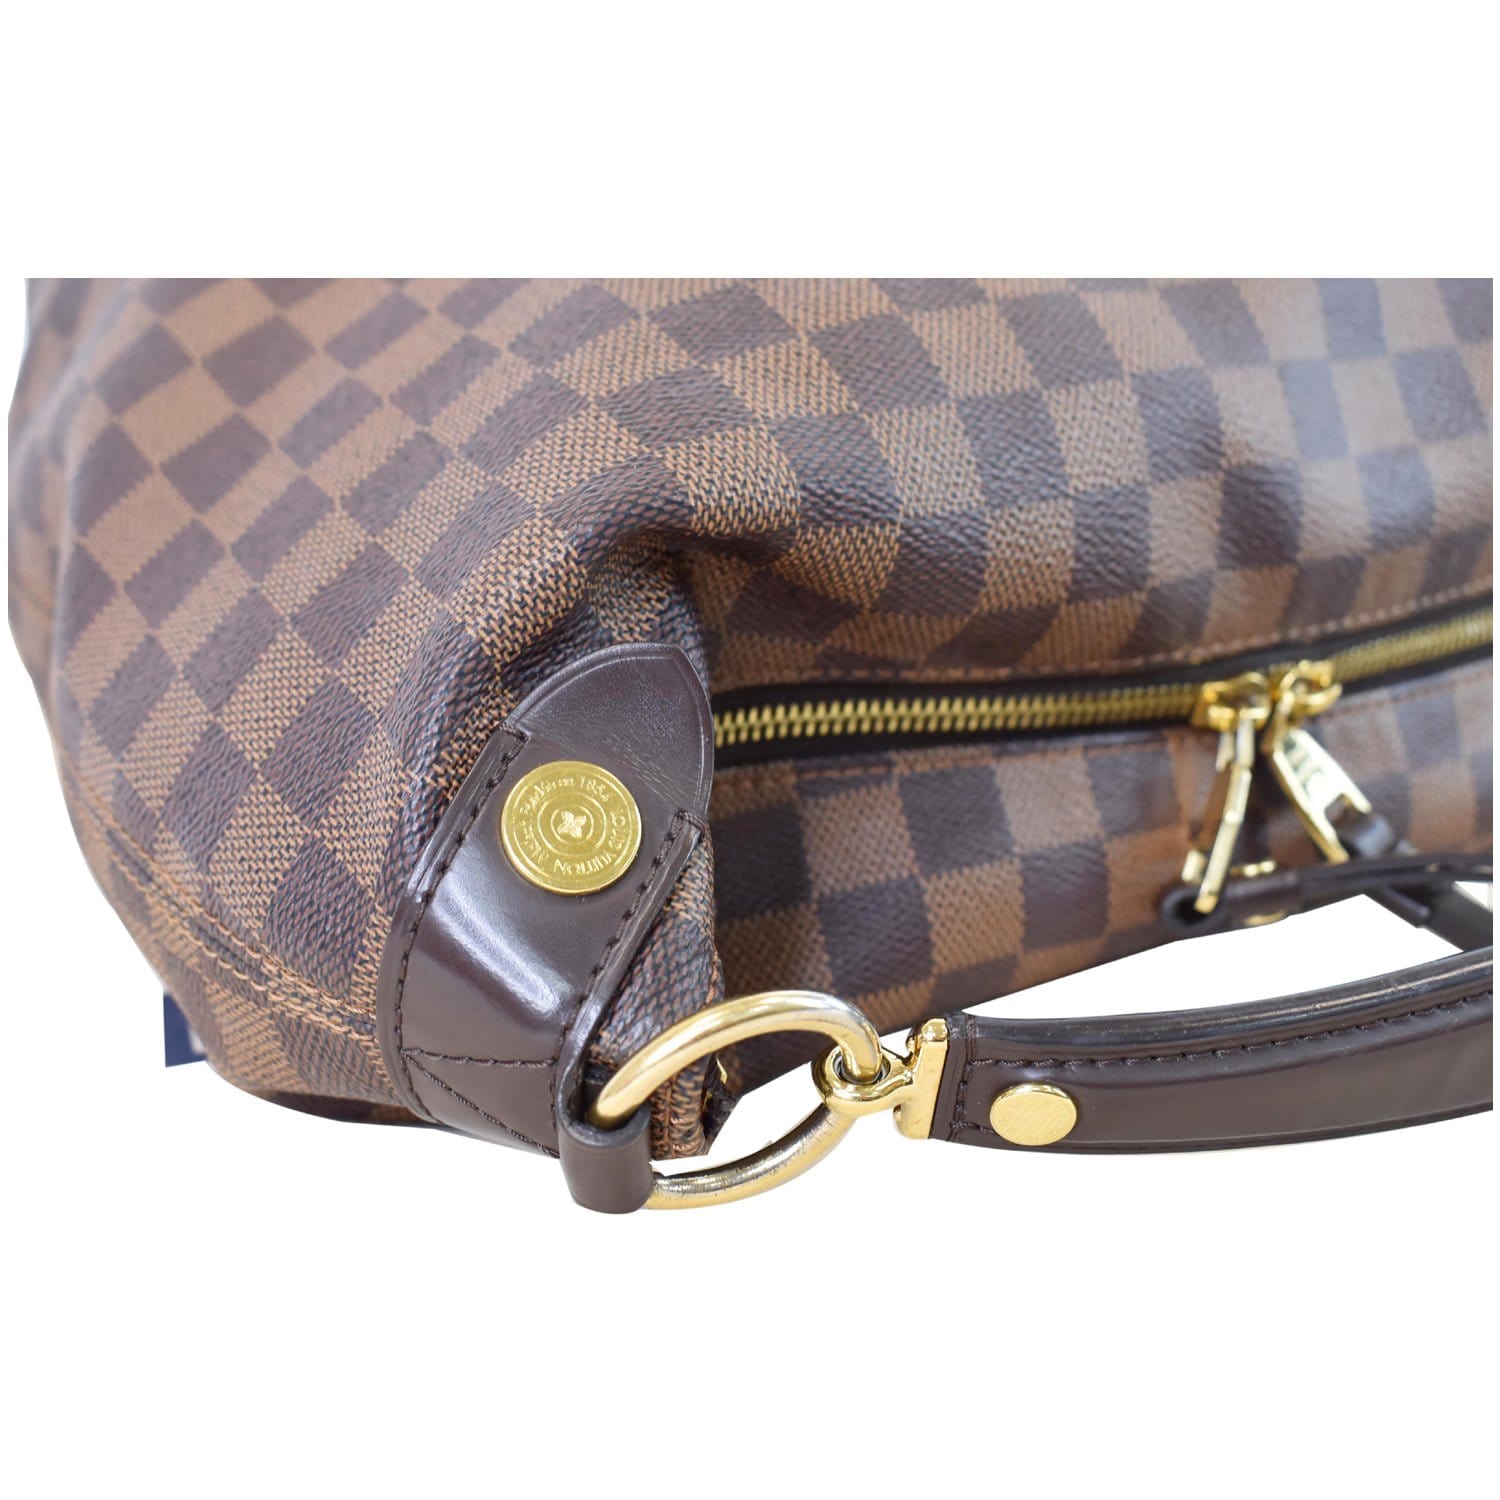 Bag and Purse Organizer with Singular Style for Louis Vuitton Duomo Hobo